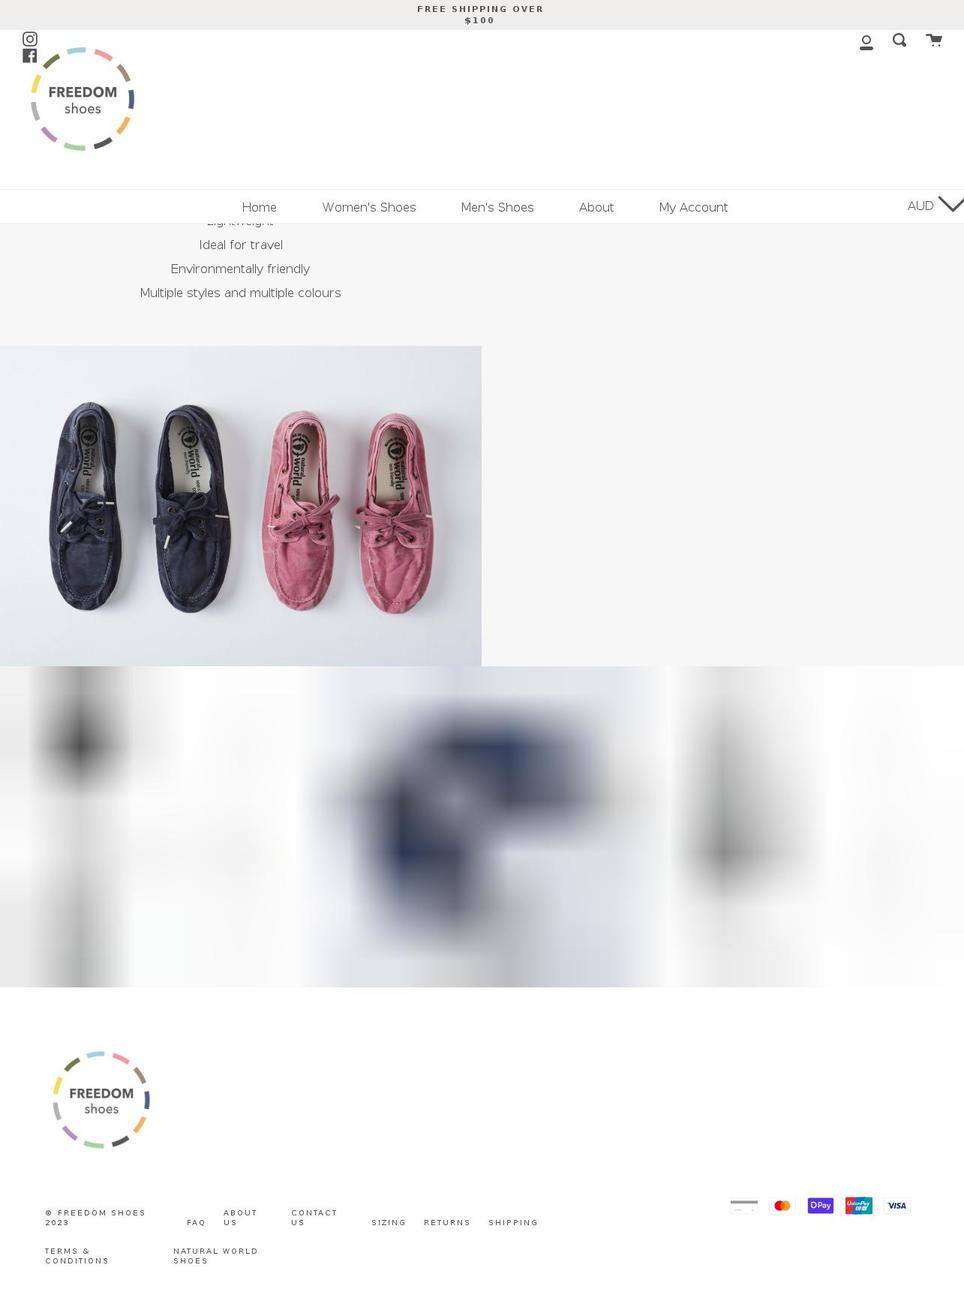 WATCHES Shopify theme site example freedomshoes.com.au